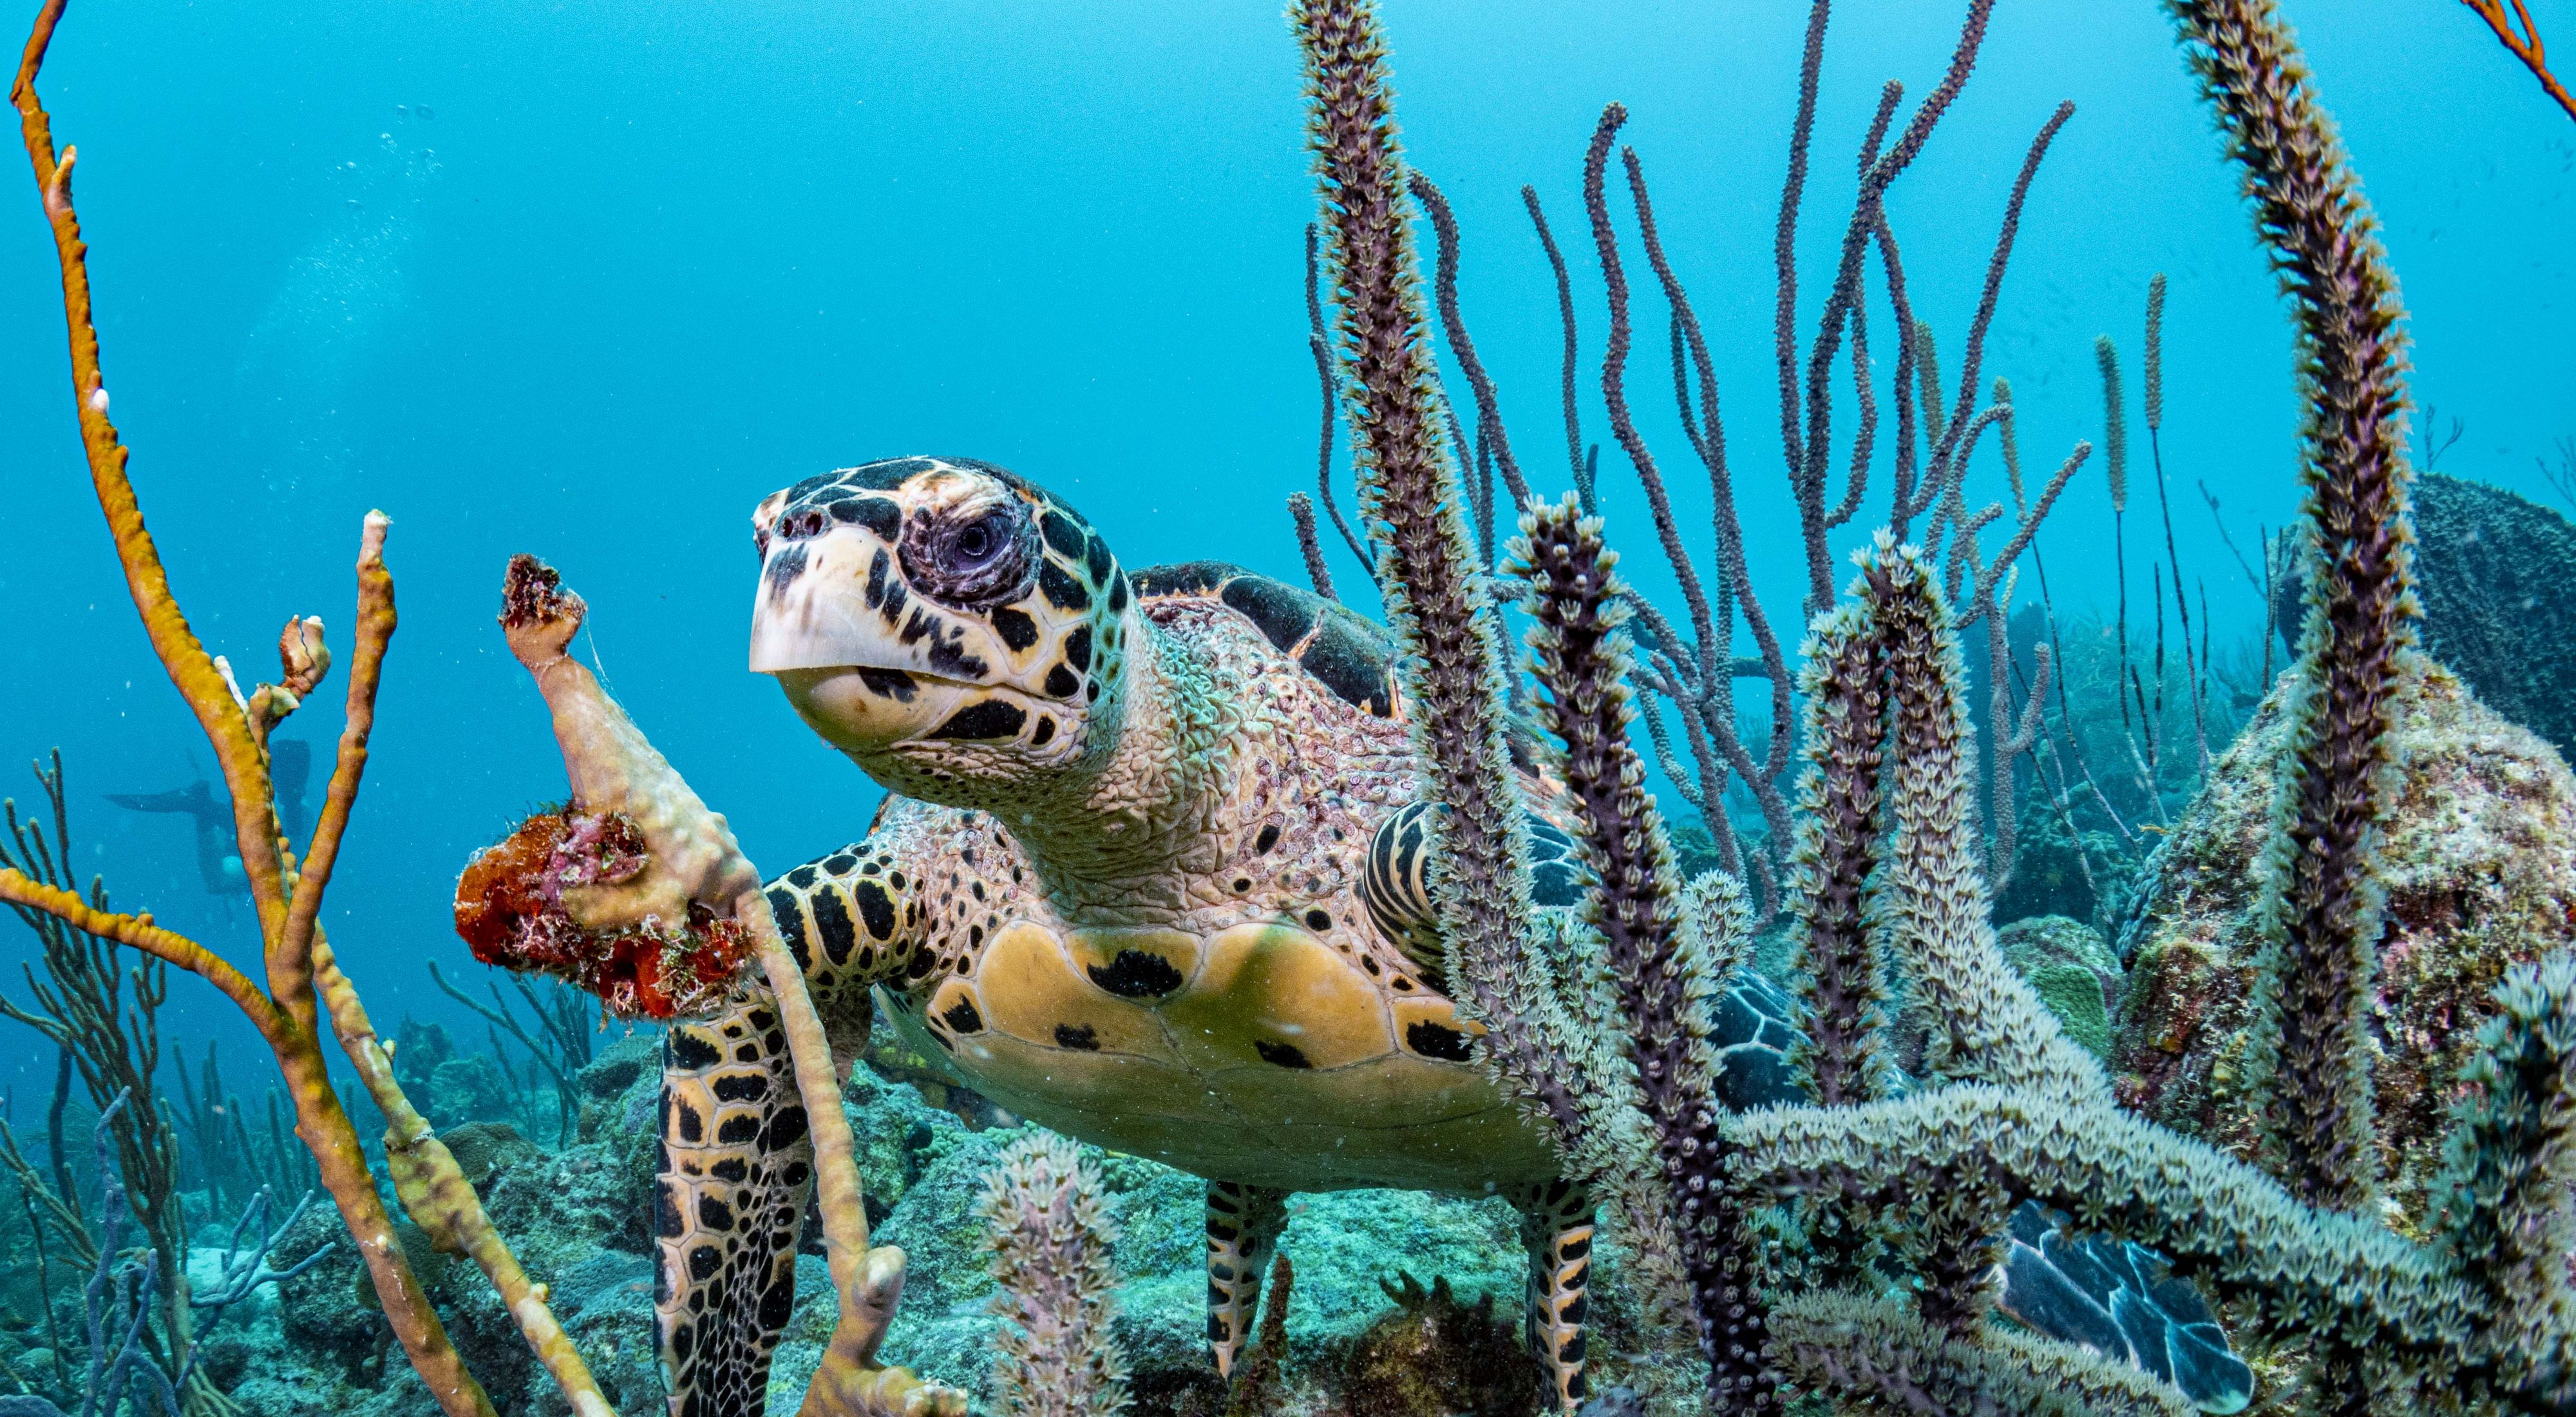 A hawksbill sea turtle on a coral reef in Barbados.